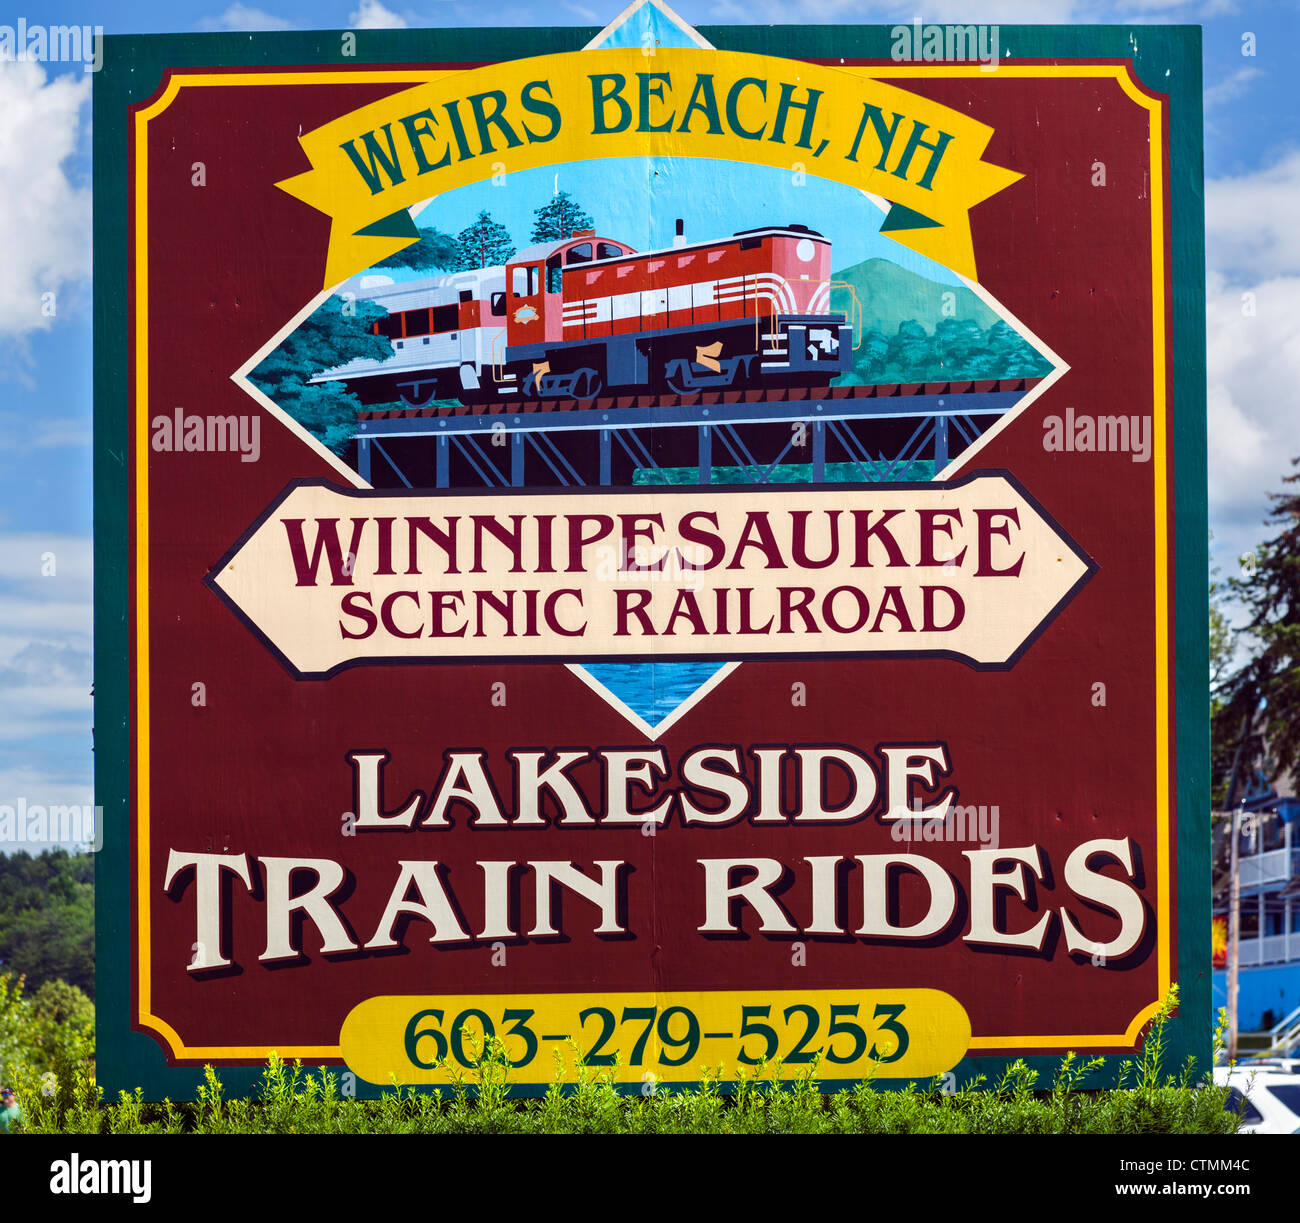 Sign for lakeside train rides in Weirs Beach on Lake Winnipesaukee, Lakes Region, New Hampshire, USA Stock Photo